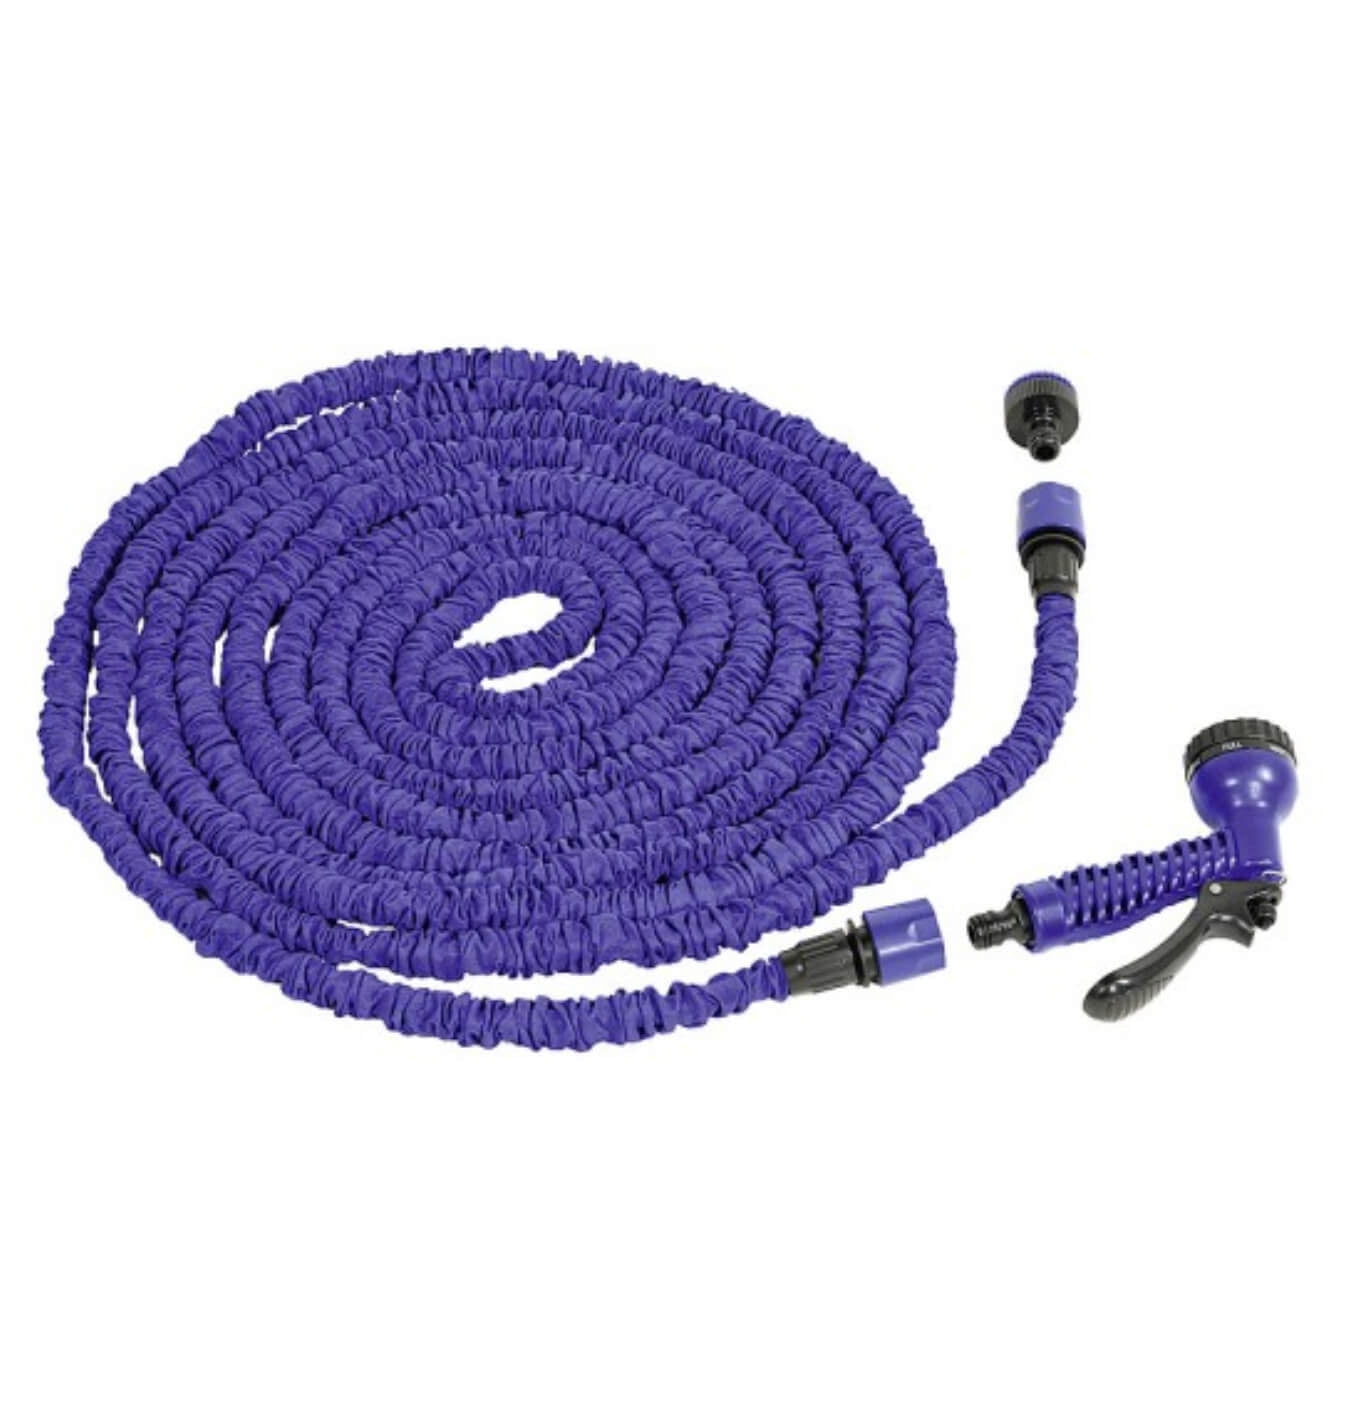 Yachticon Flex Stretchable Water Hose with Sprayer | 7.5 - 22.5 Metres